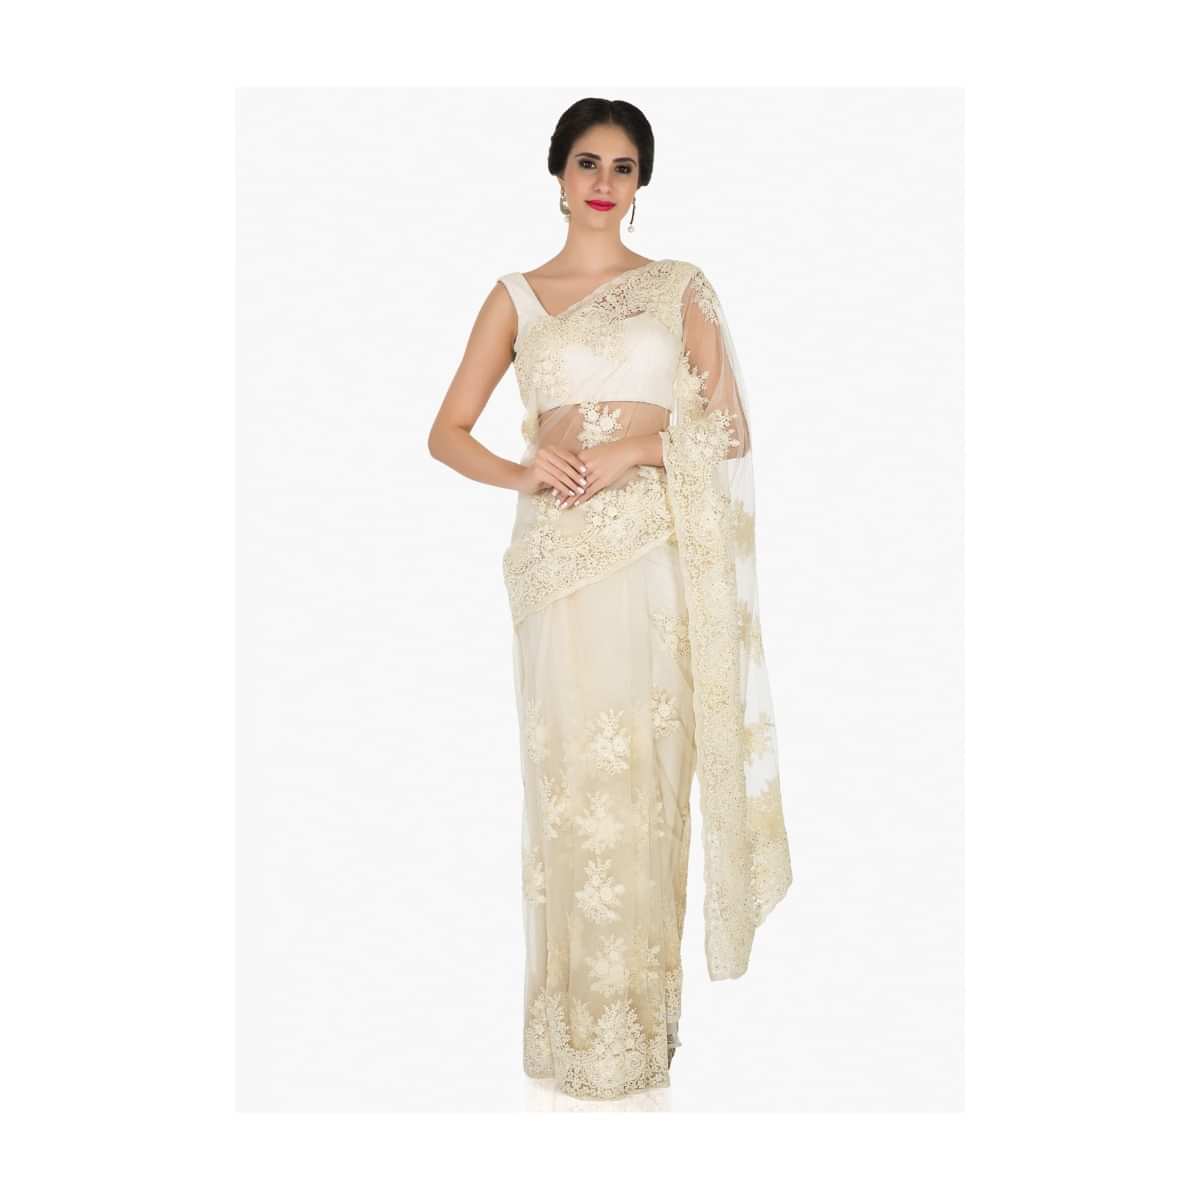 Off-white saree in net crafted in pretty thread work only on Kalki